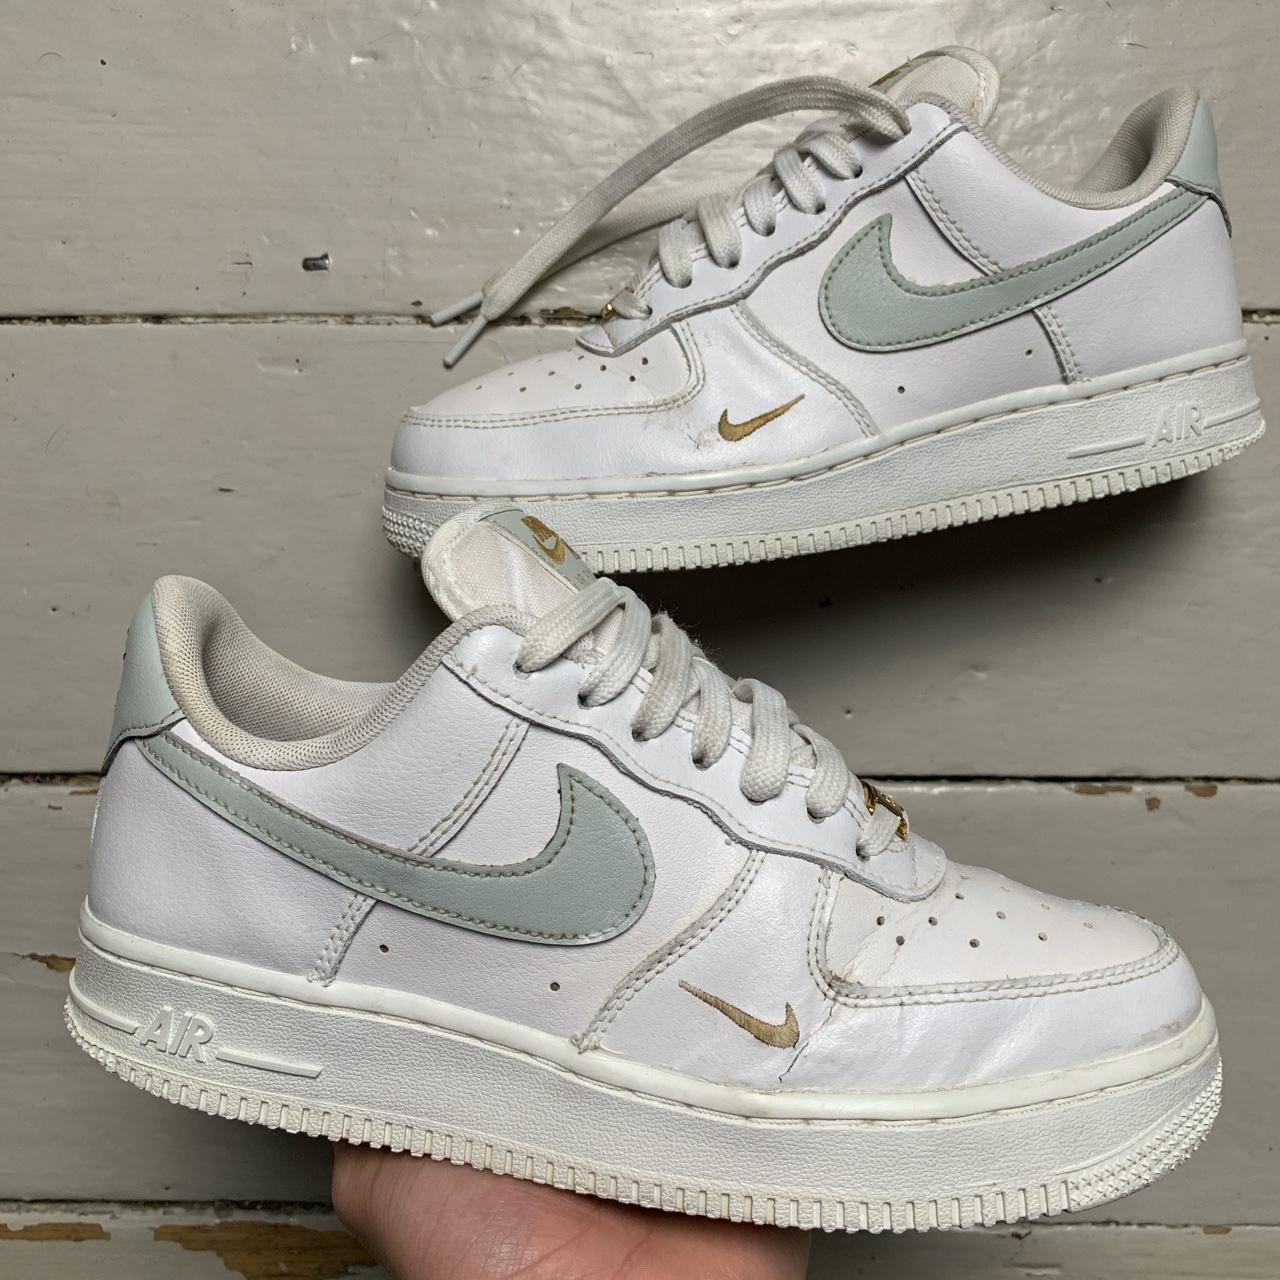 Nike Air Force 1 White and Grey